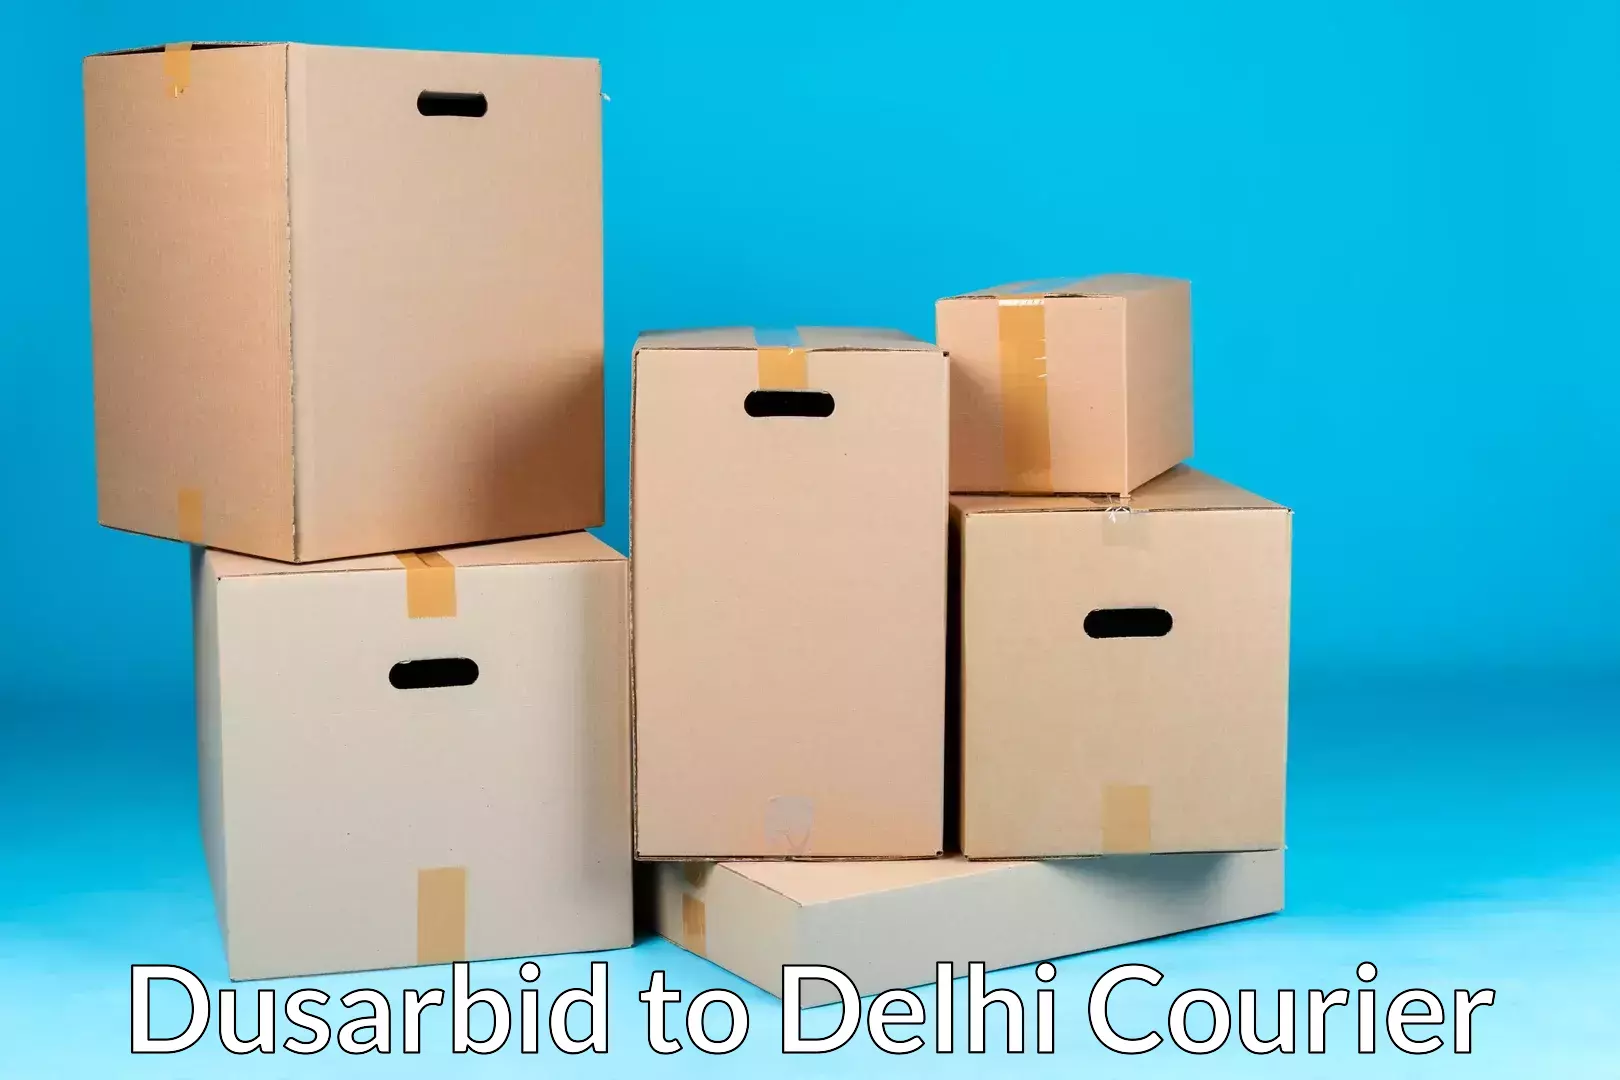 Full-service household moving in Dusarbid to Delhi